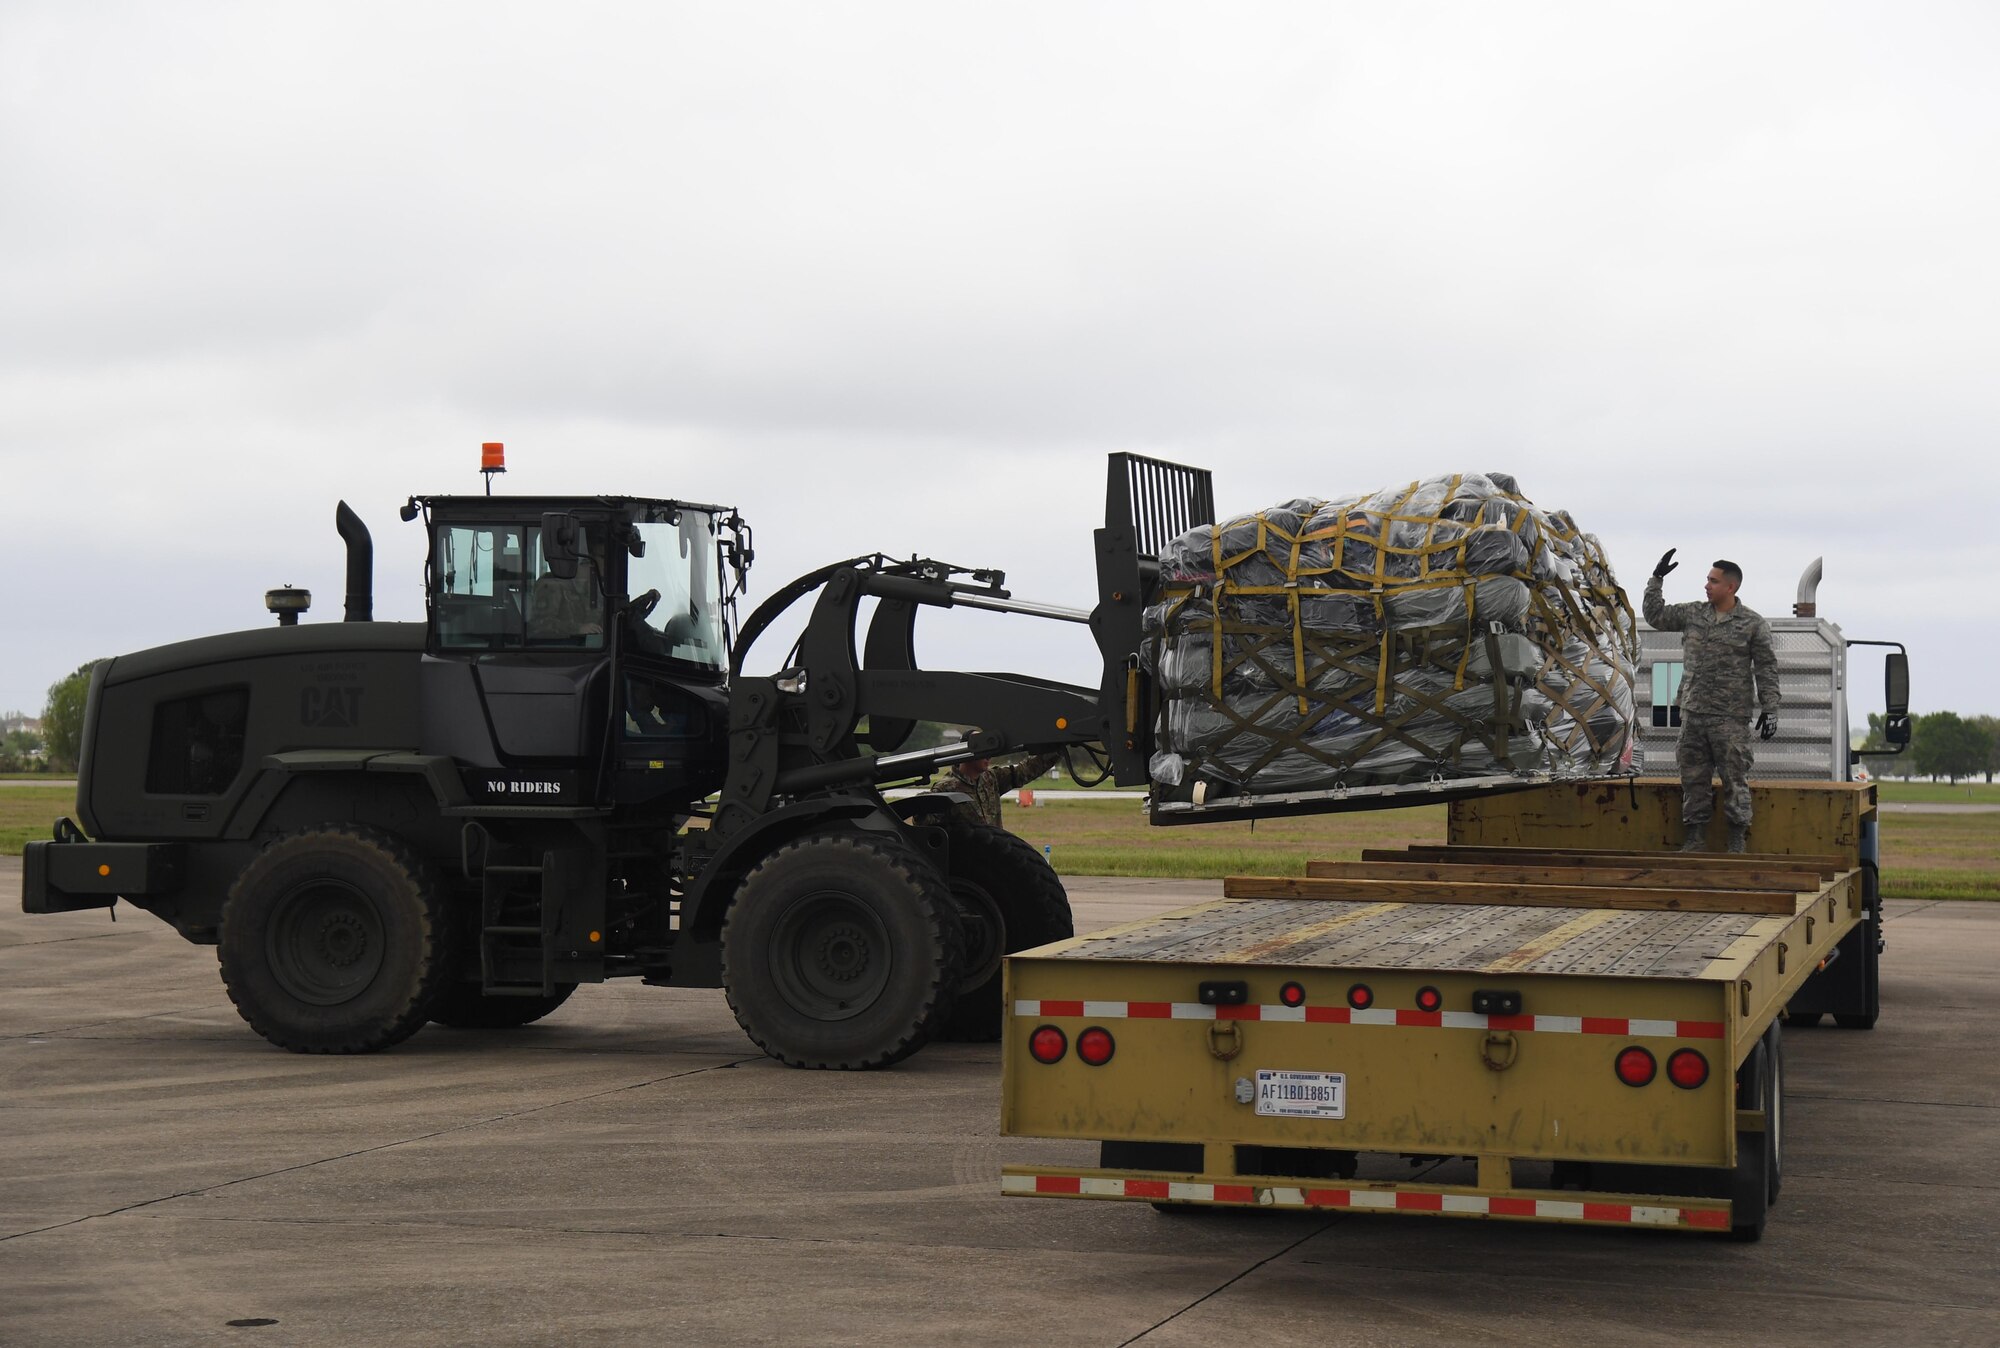 A pallet of duffel bags being loaded on a flat bed truck.